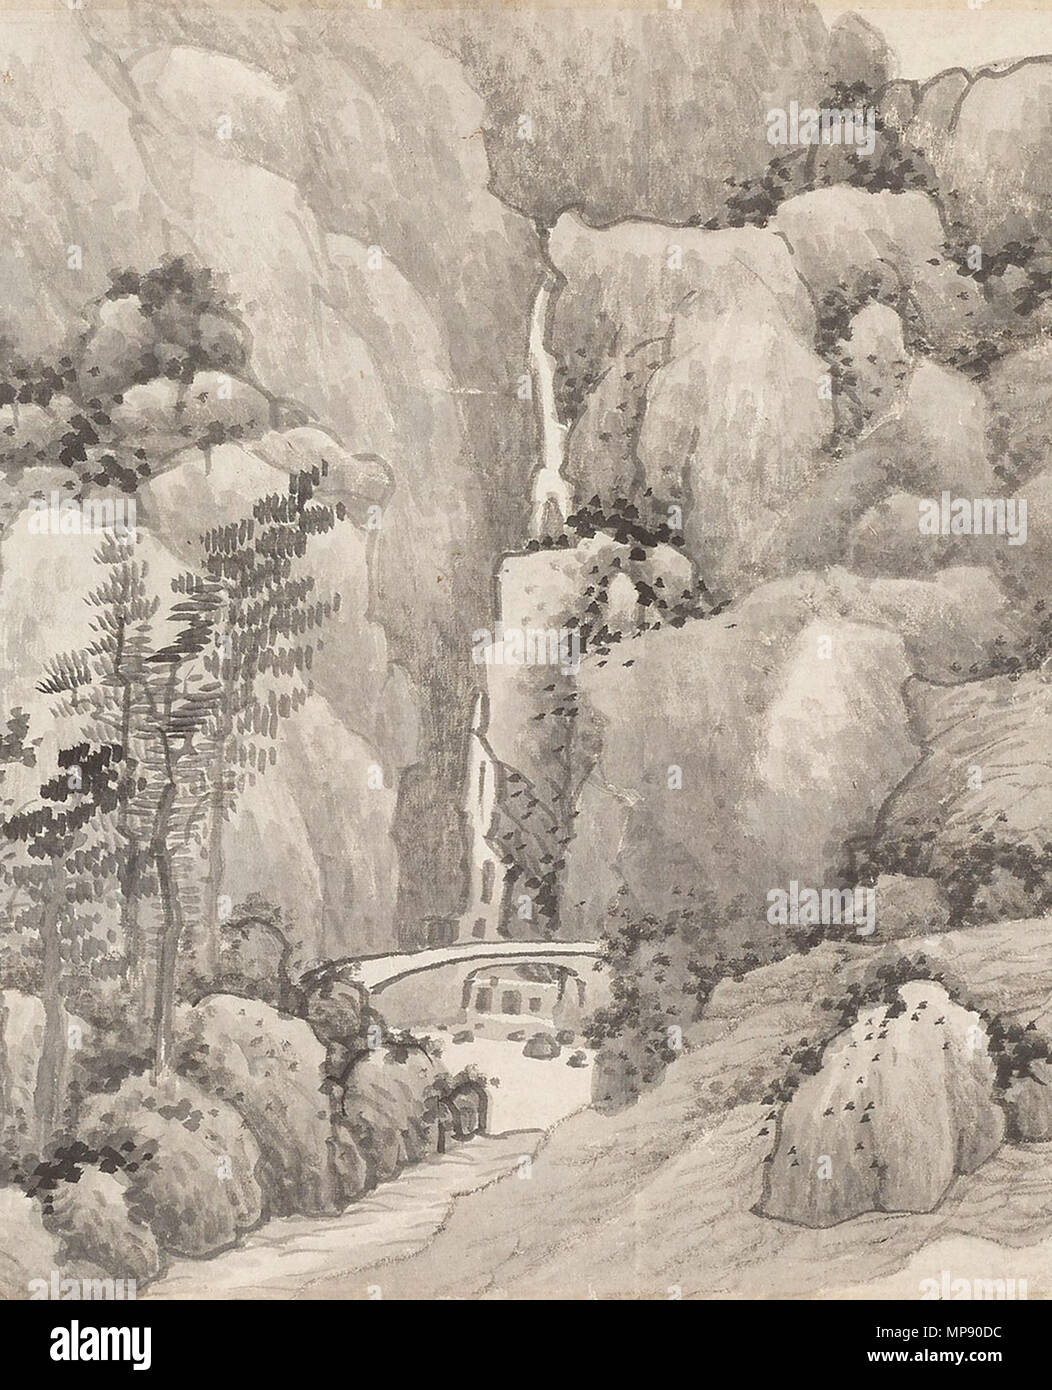 . English: Landscape by Gong Xian (1618-1689) . before 1690.   Gong Xian  (–1689)     Alternative names Kung Hsien  Description Chinese painter  Date of birth/death circa 1620 1689  Location of birth Kunshan  Work location Nanjing  Authority control  : Q3110482 VIAF: 43184991 ULAN: 500125754 LCCN: n82081933 GND: 142675830 SUDOC: 181017709 WorldCat 791 Landscape by Gong Xian (1618-1689) Stock Photo